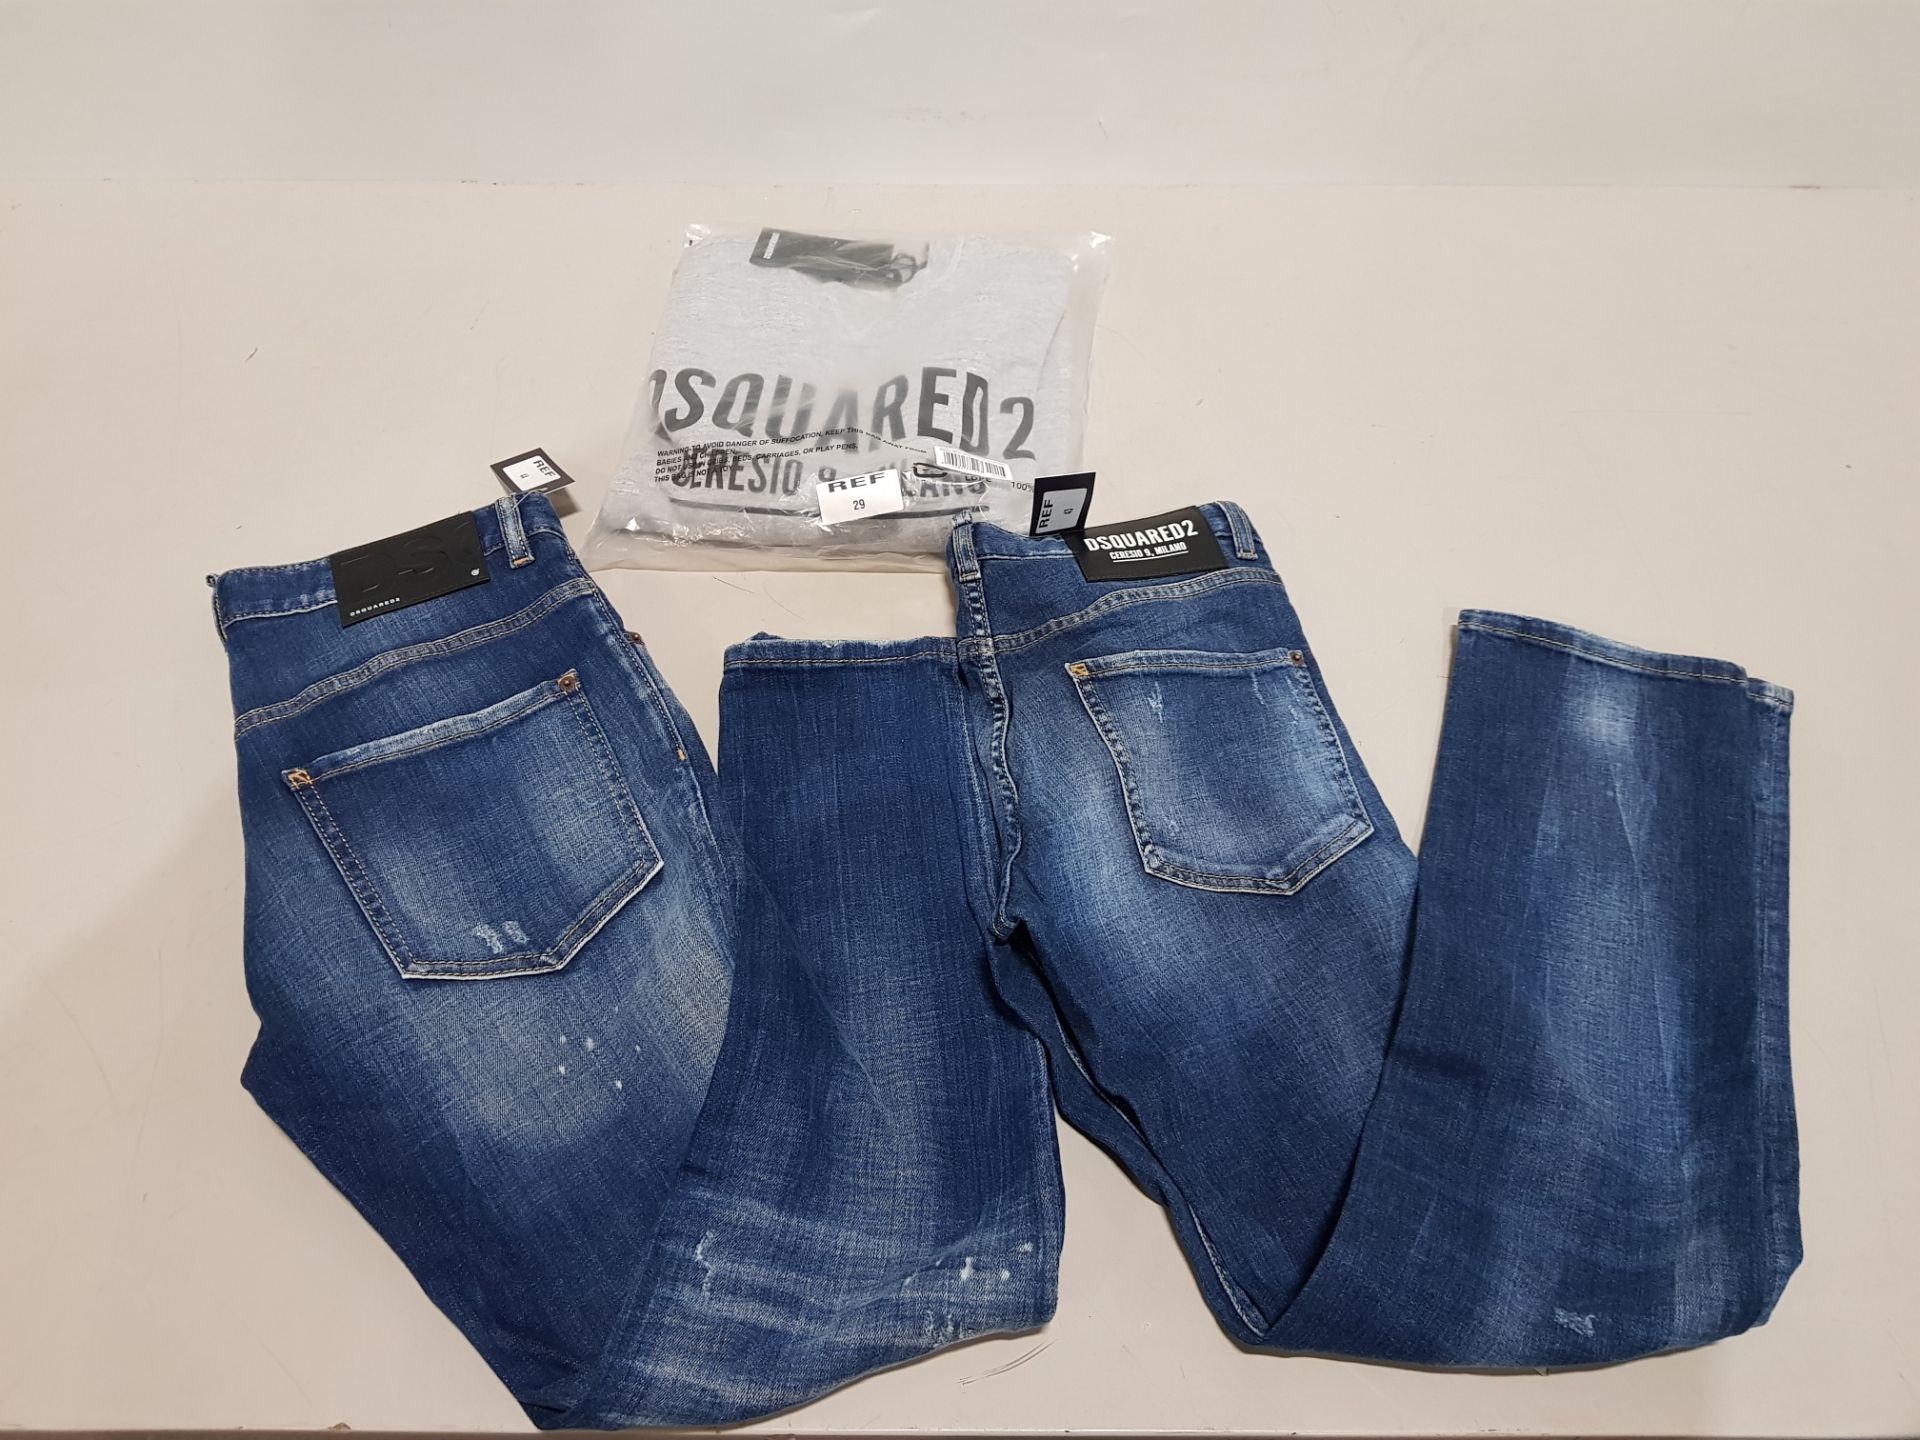 3 X BRAND NEW MIXED DSQUARED2 LOT TO INCLUDE 2X DSQAURED2 DENIM JEANS SIZE 14 AND 16 YEARS -£196 AND